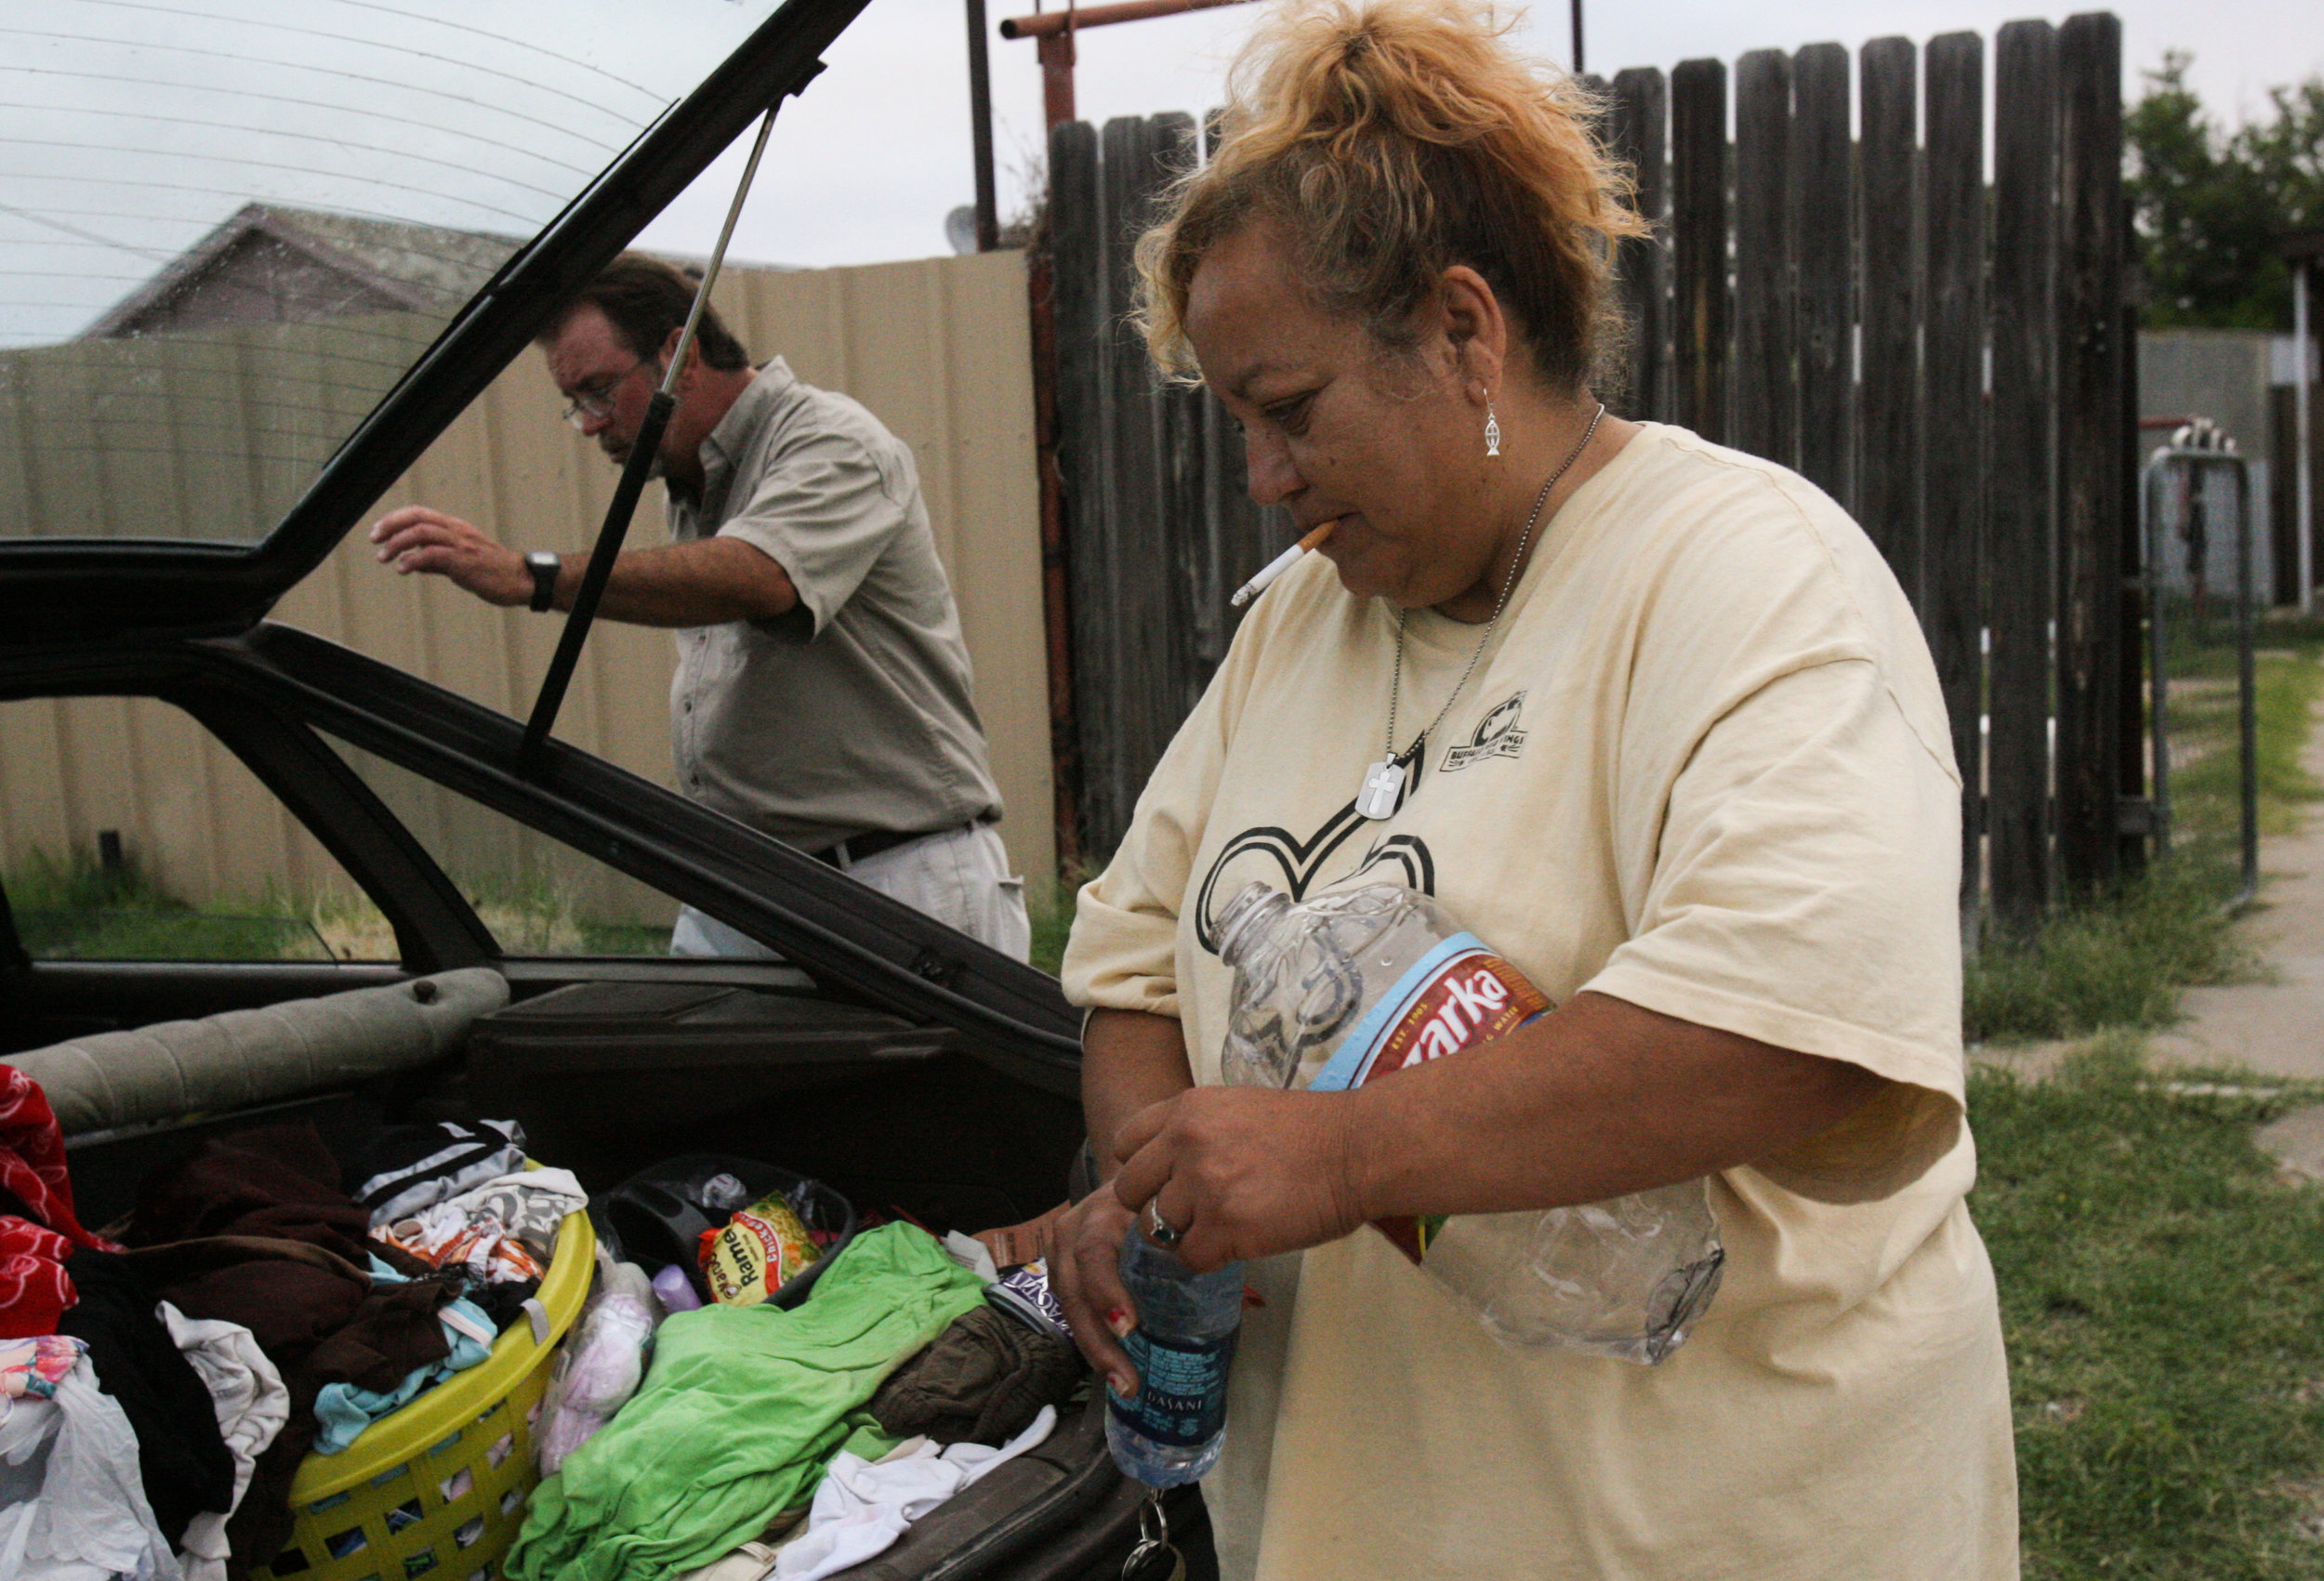  Juanita Torres, right, fills up a water bottle as she prepares to do laundry with fellow shelter resident Steve Seward at his mother's home Aug. 23, 2008, in Crane, Texas. 